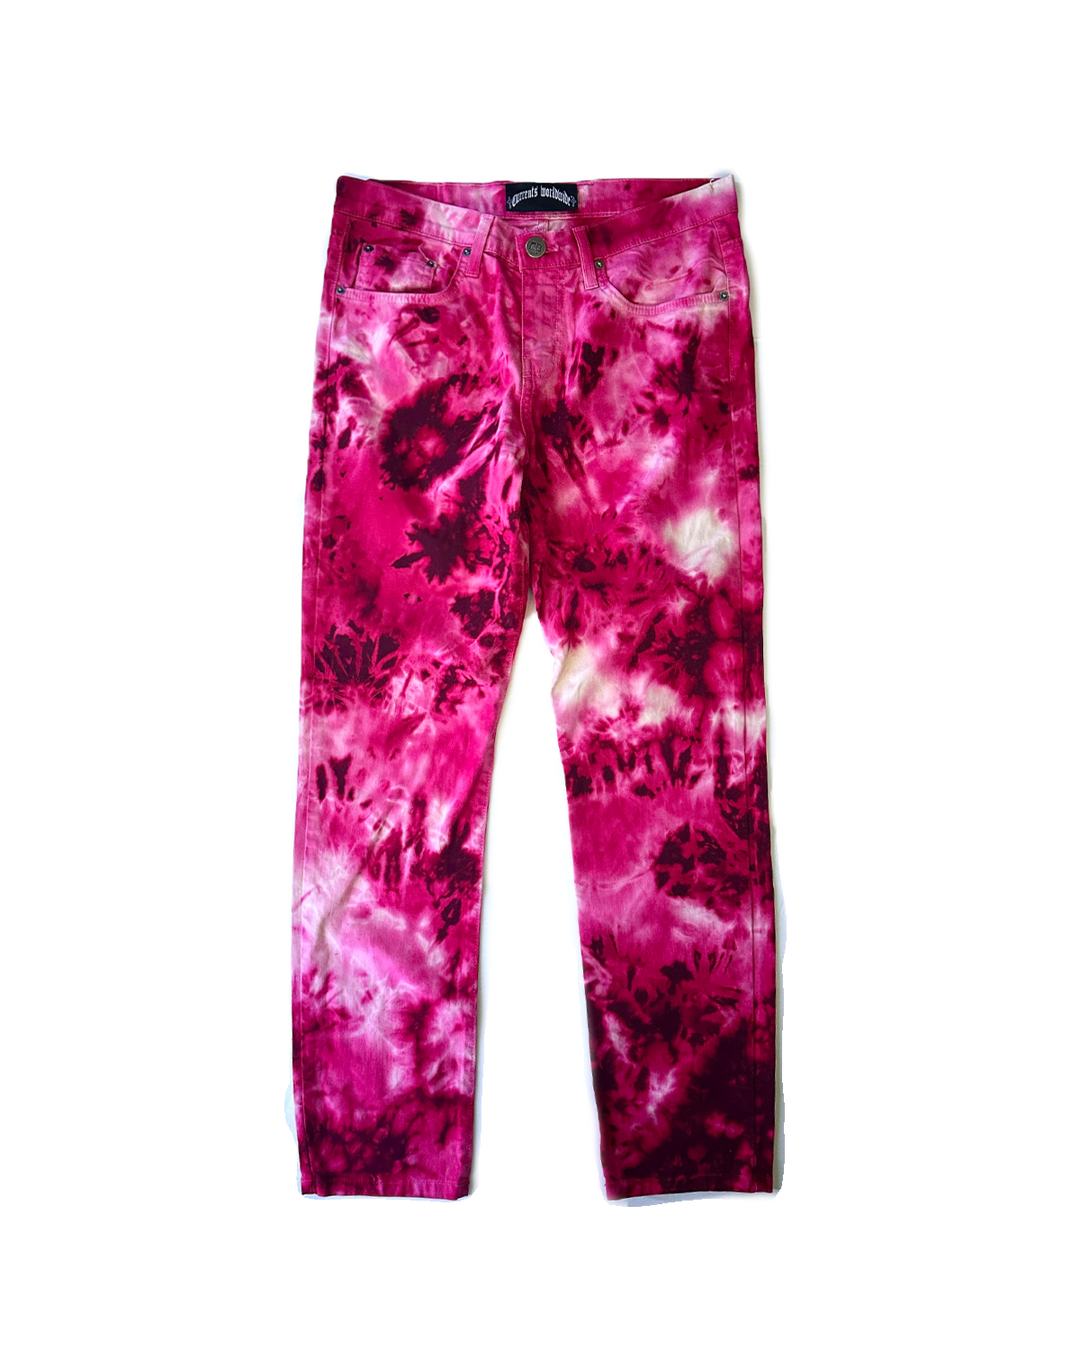 Spider Candy Denim Pants (LAST ONE)